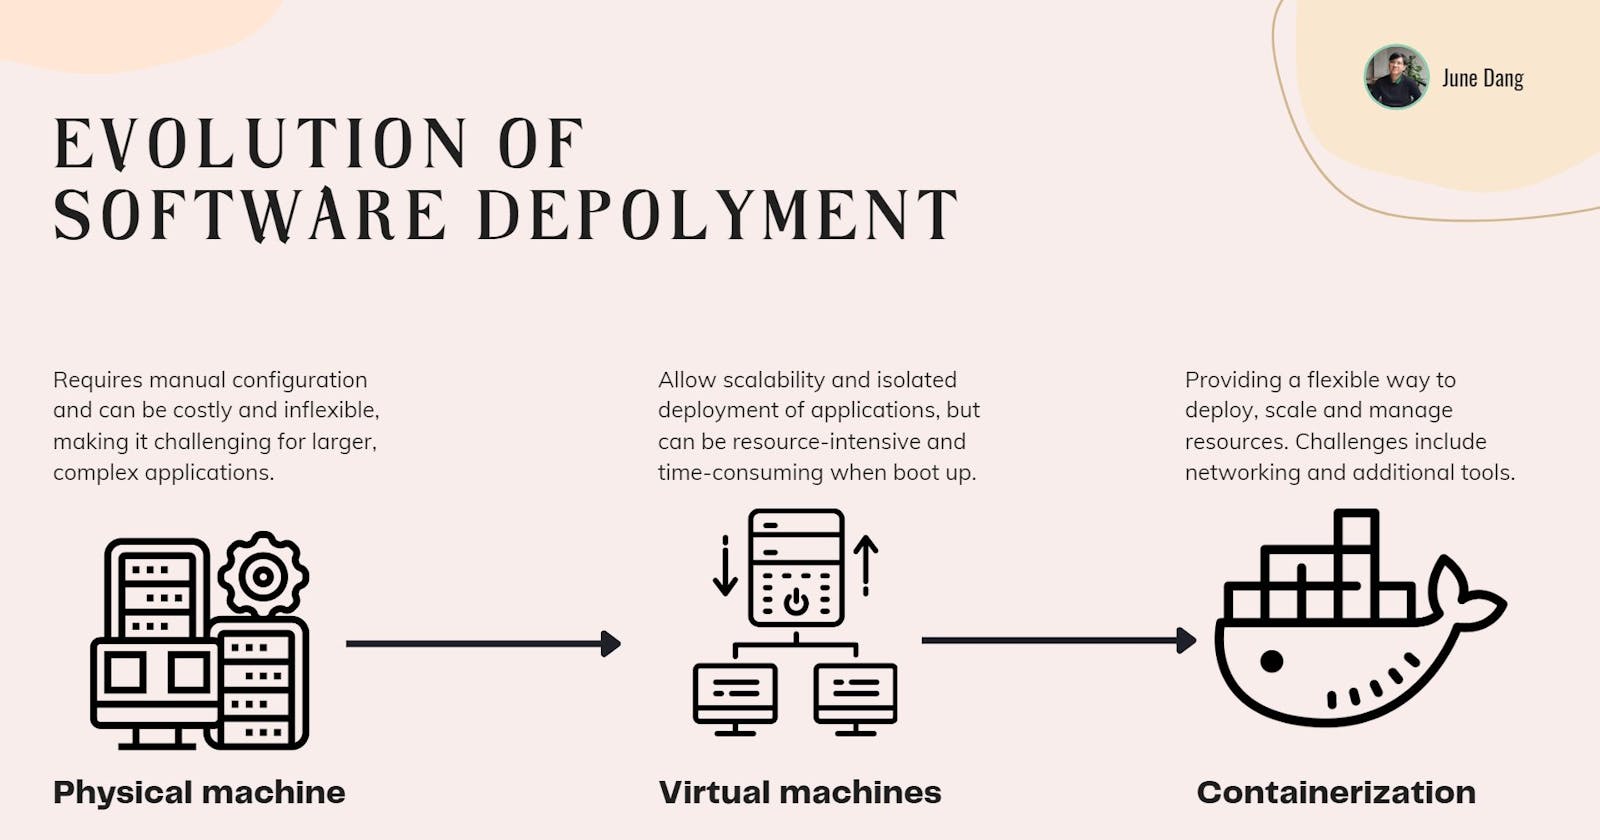 An evolution story of Software Deployment: From Dedicated Server to Containerization